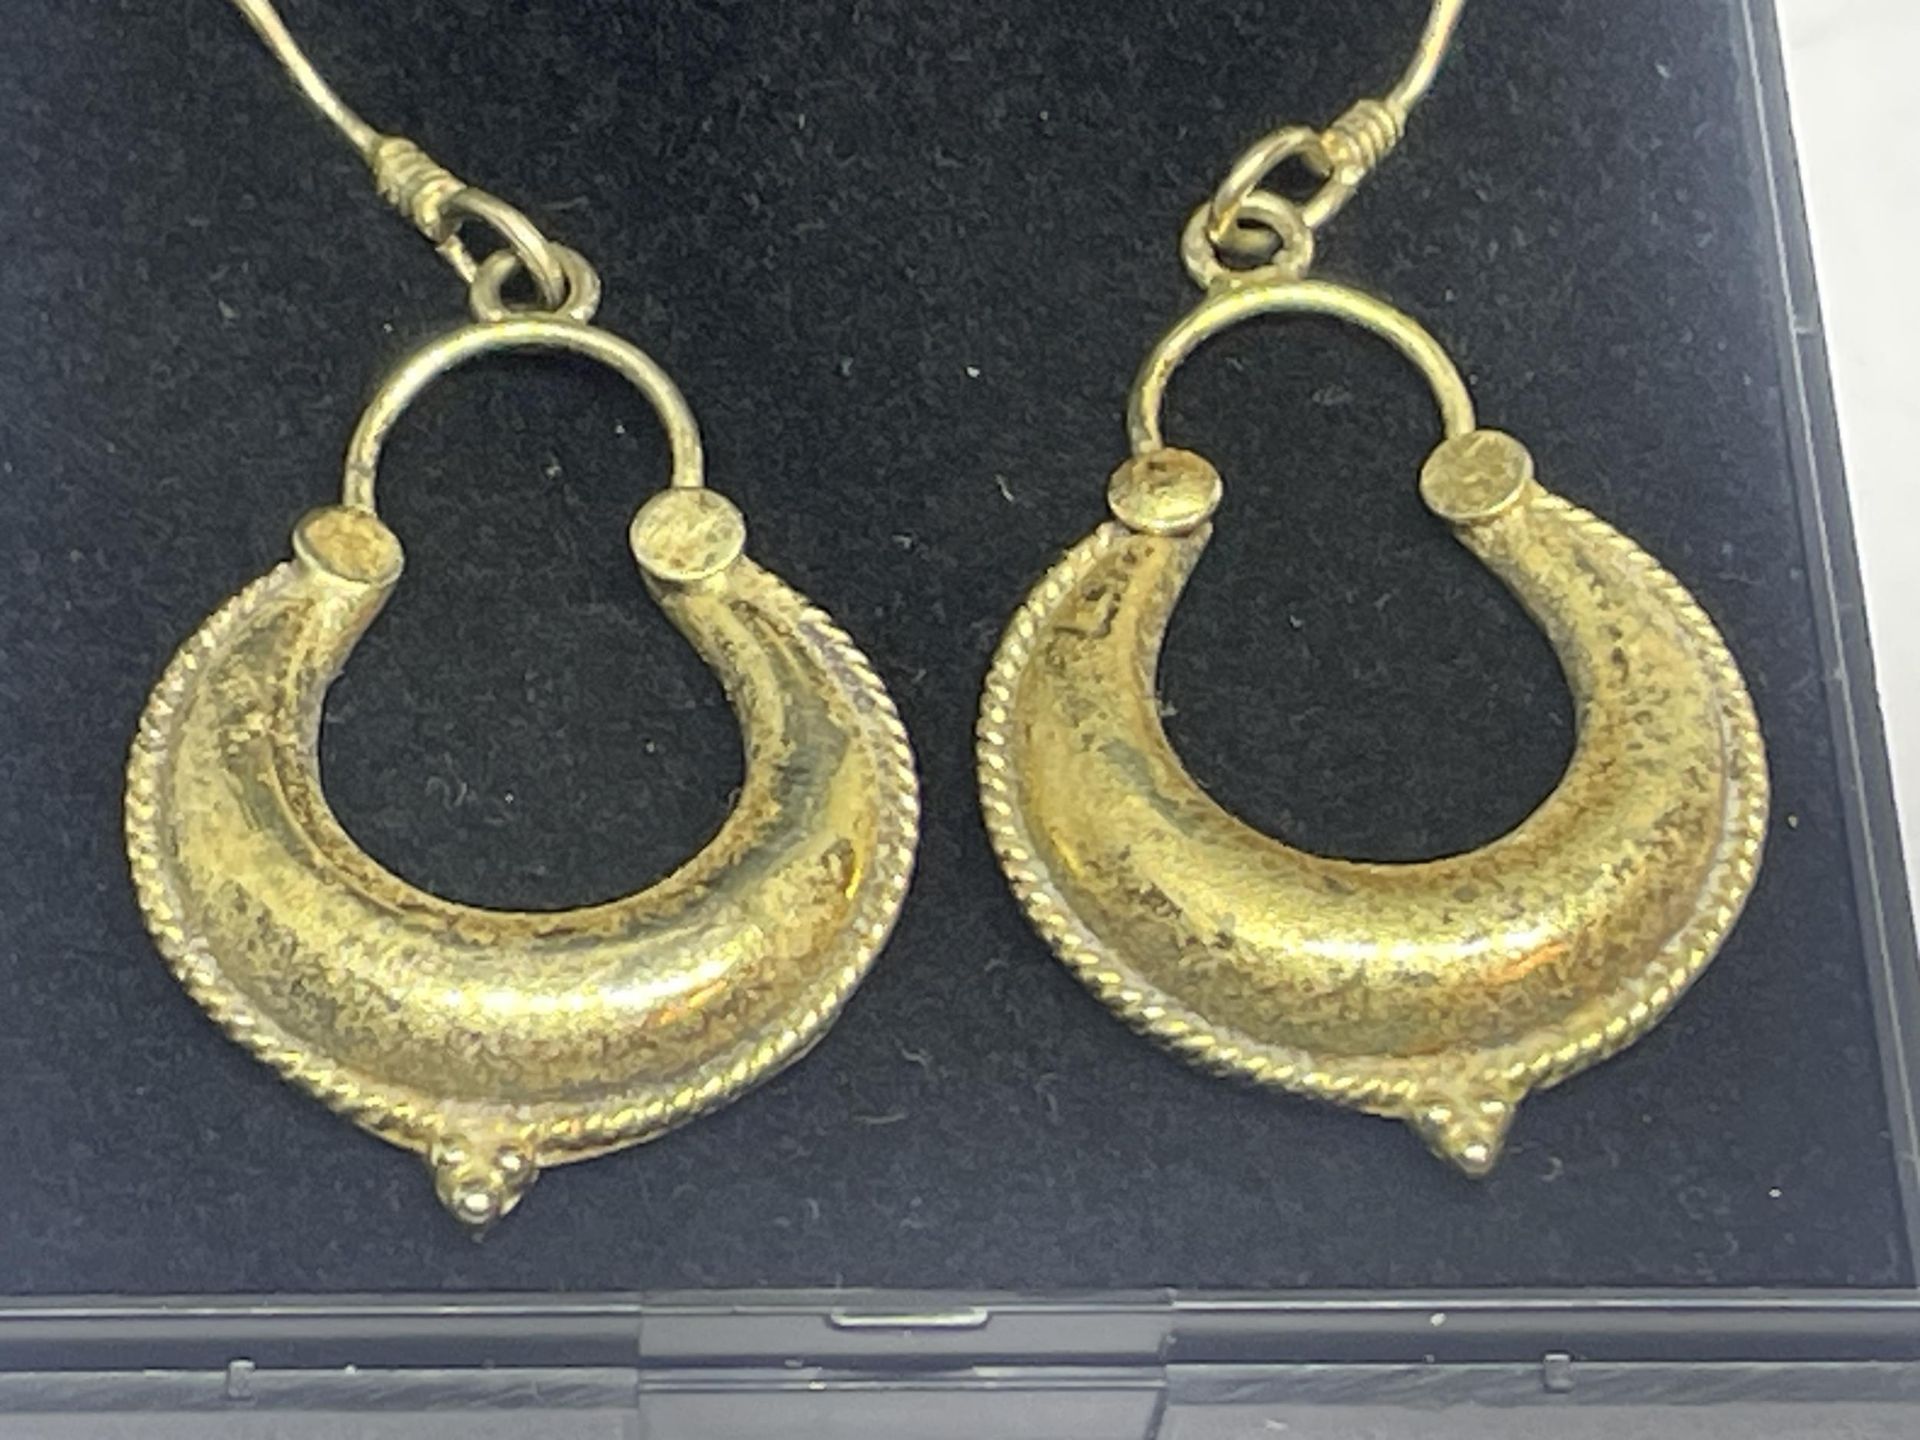 A PAIR OF 925 SILVER CRESCENT MOON DROP EARRINGS IN A PRESENTATION BOX - Image 2 of 2